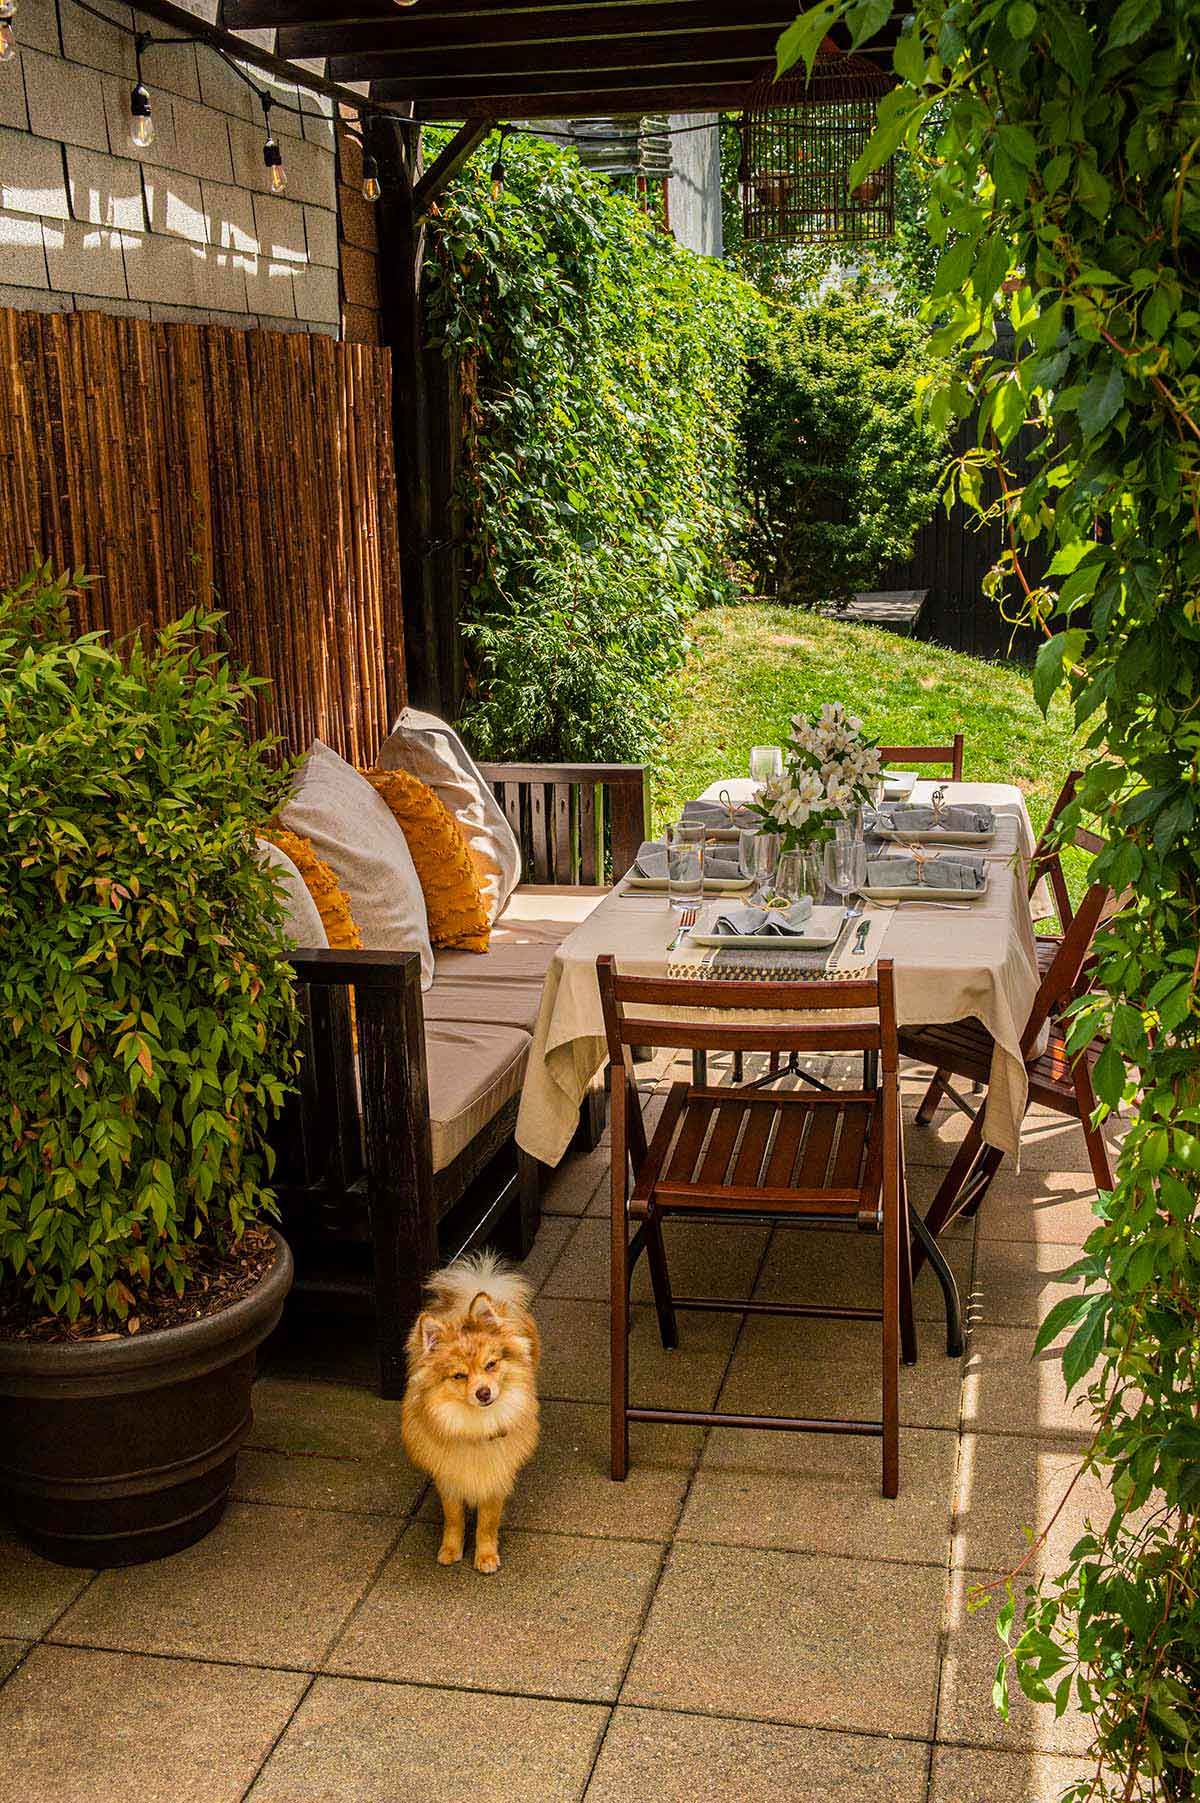 A small dog standing in front of a table set in a garden.